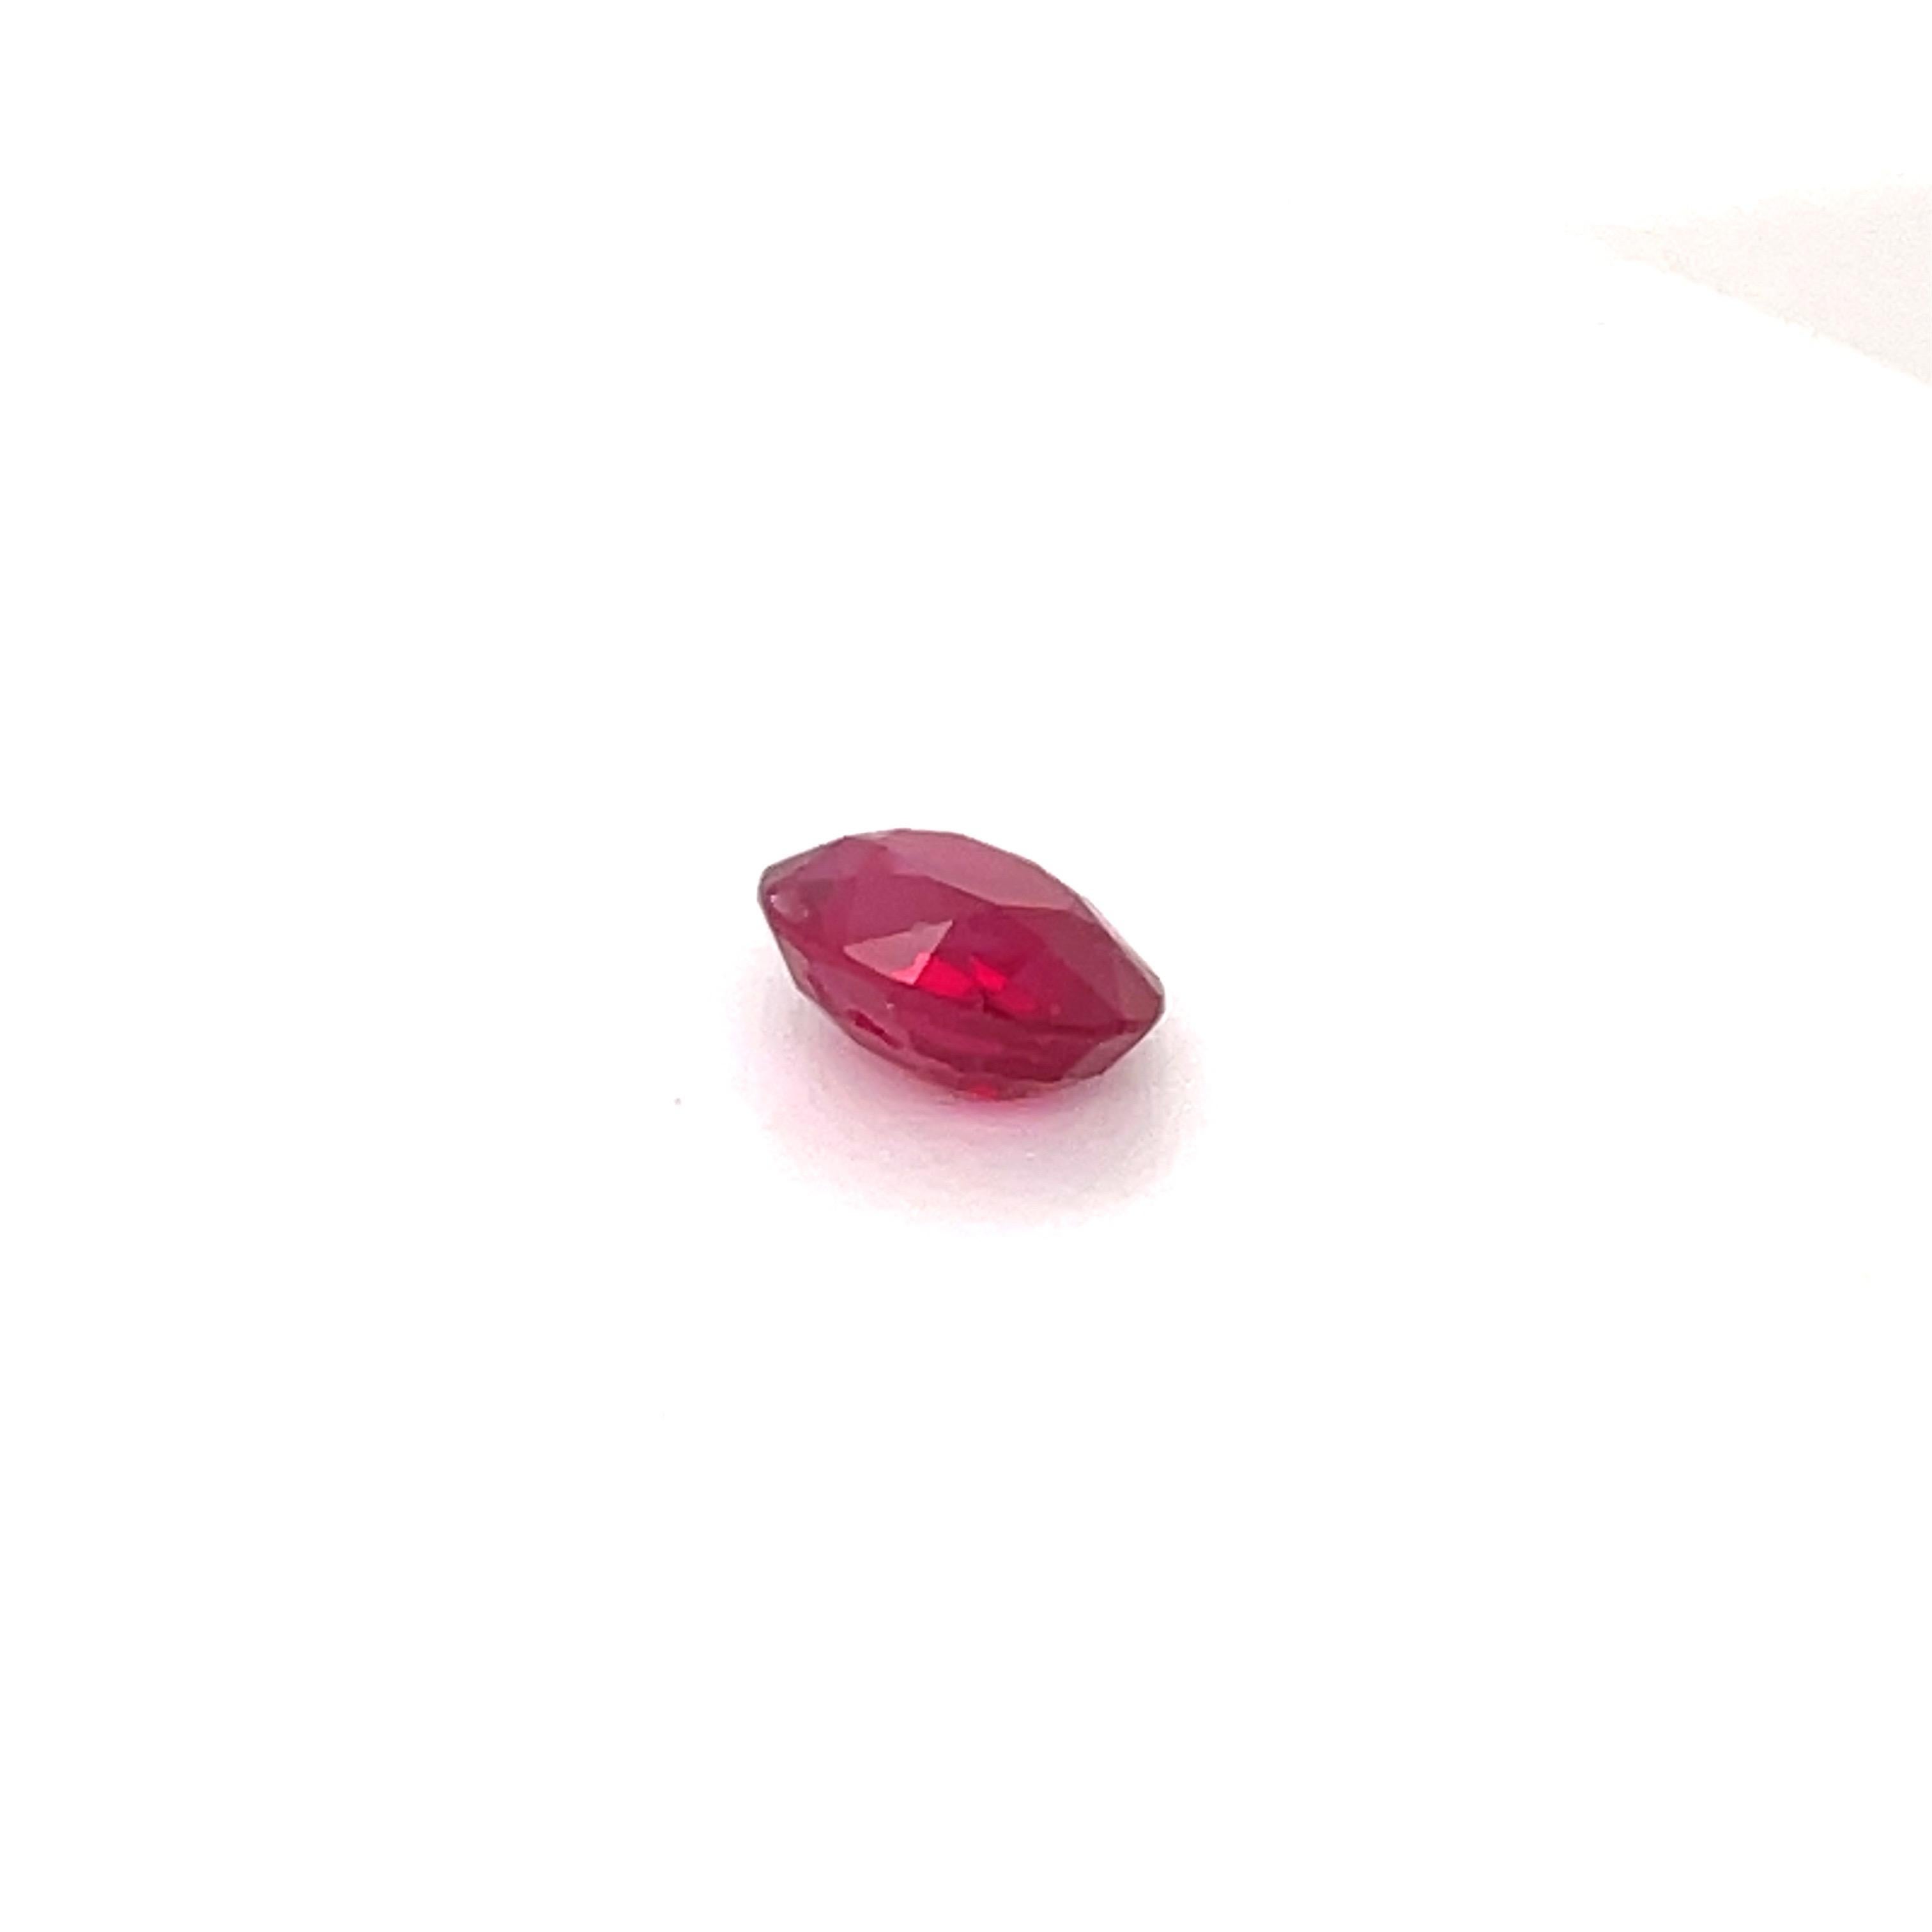 Contemporary GRS & GIA Certified Oval Red Ruby 2.17 Carats Burma 8.80 x 6.70 MM